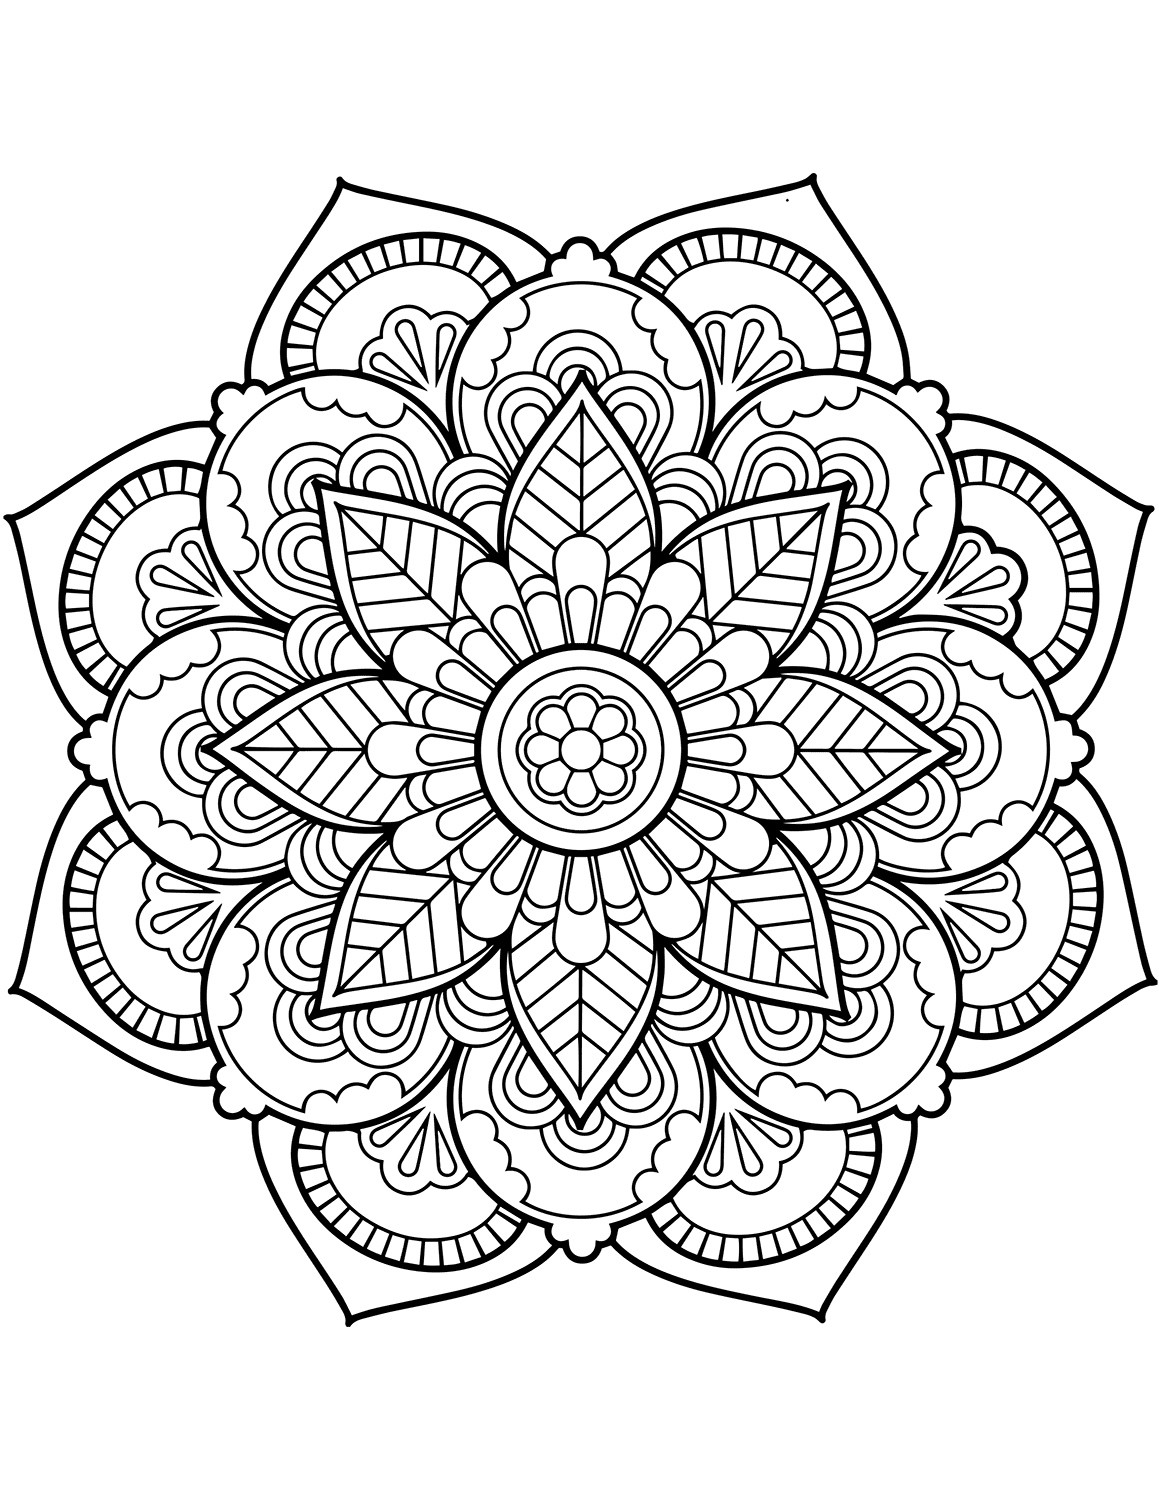 Mandala Coloring Pages For Adults Coloring Pages Printable Flower Mandalang Pages Best For Kids Free